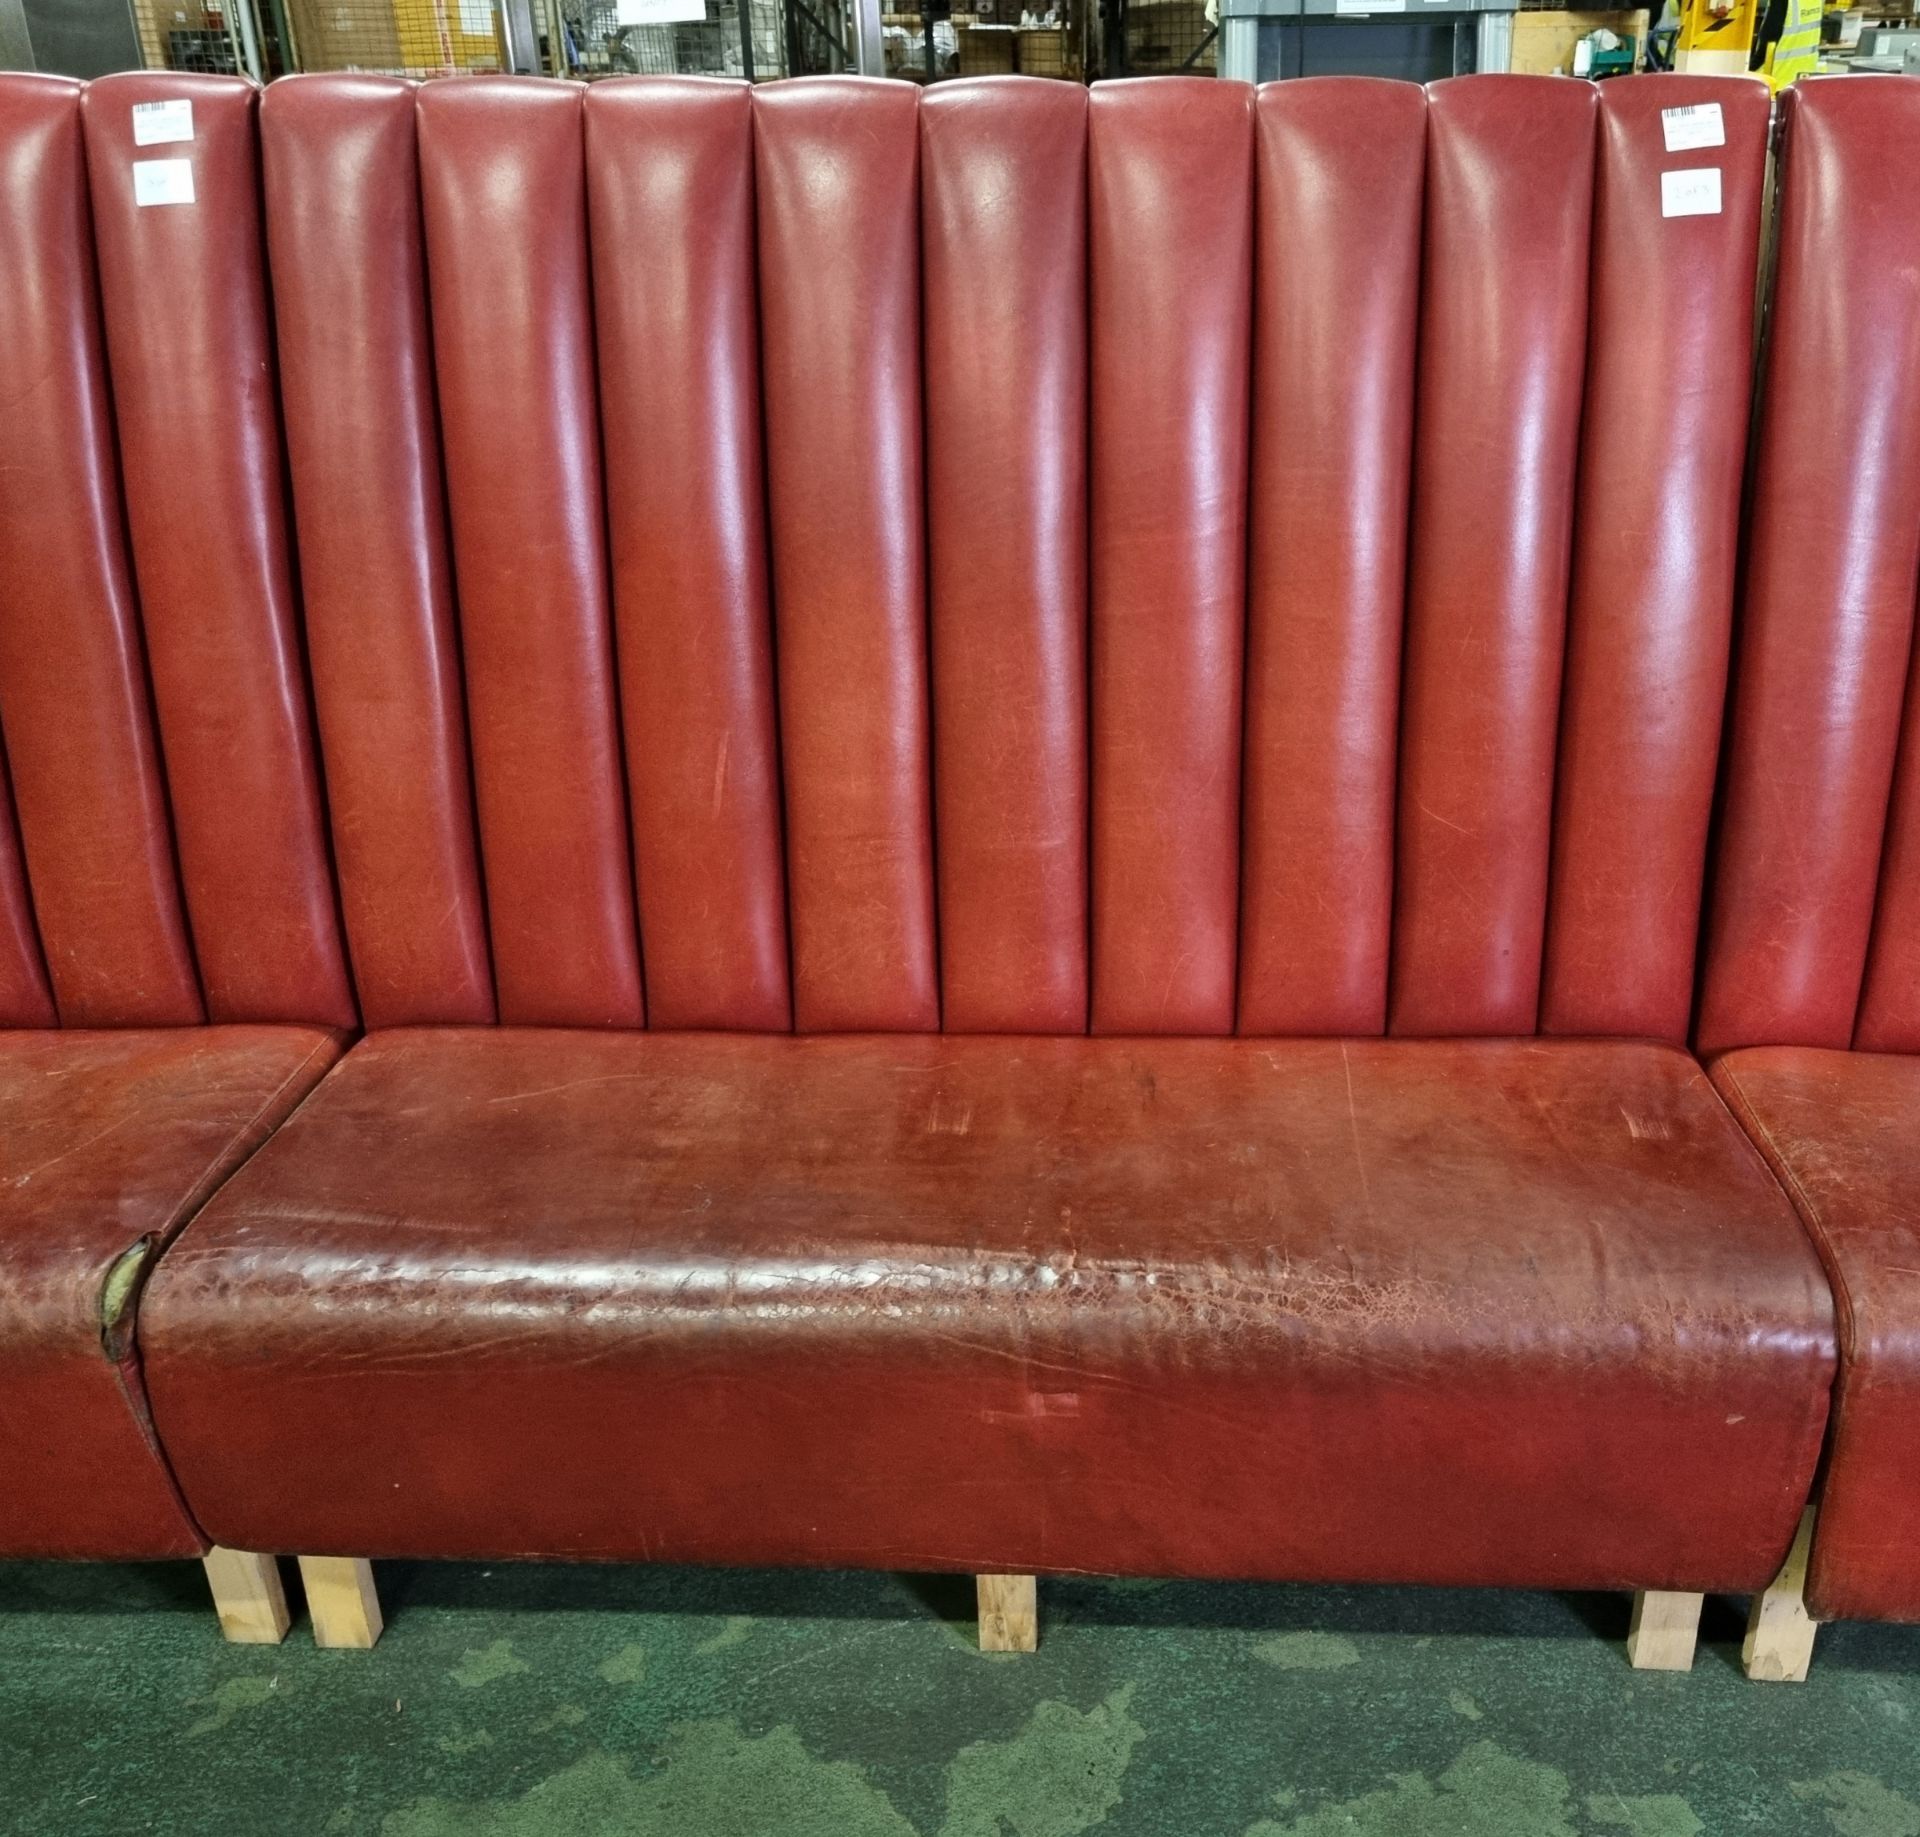 Red leather padded bench seating - Image 4 of 5